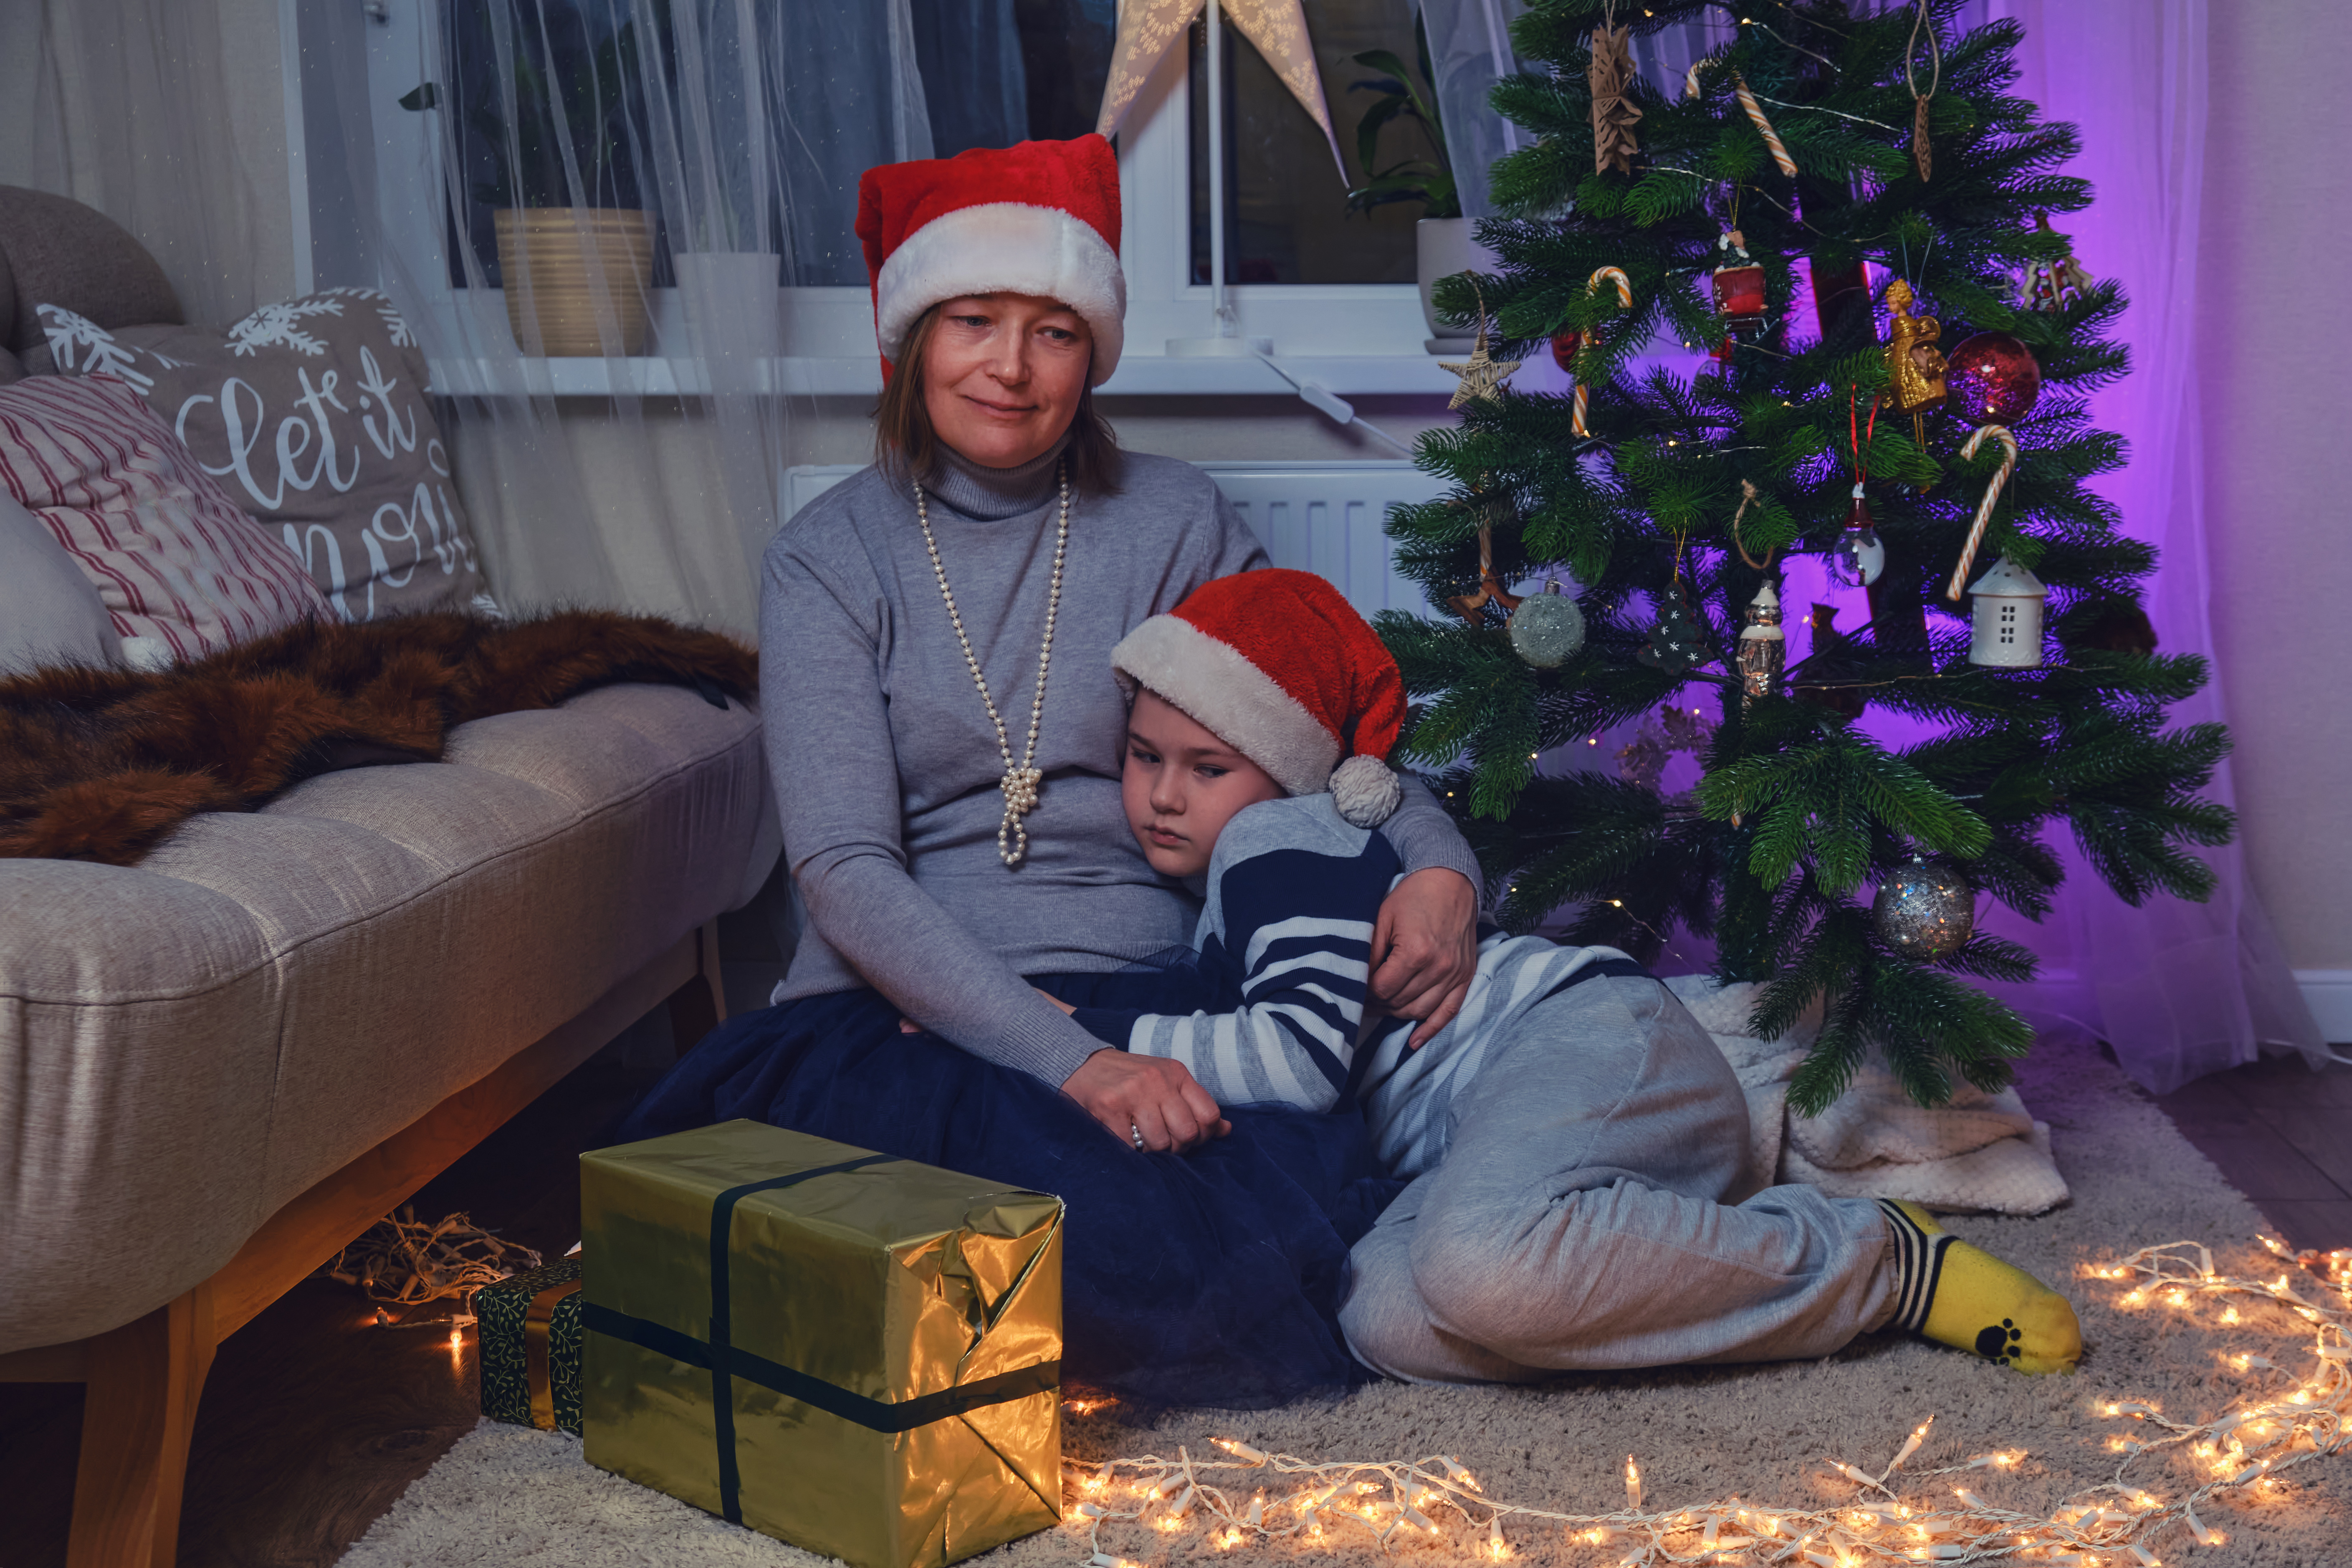 Sad mother and son sitting near the Christmas tree in the night light garlands. | Source: Getty Images